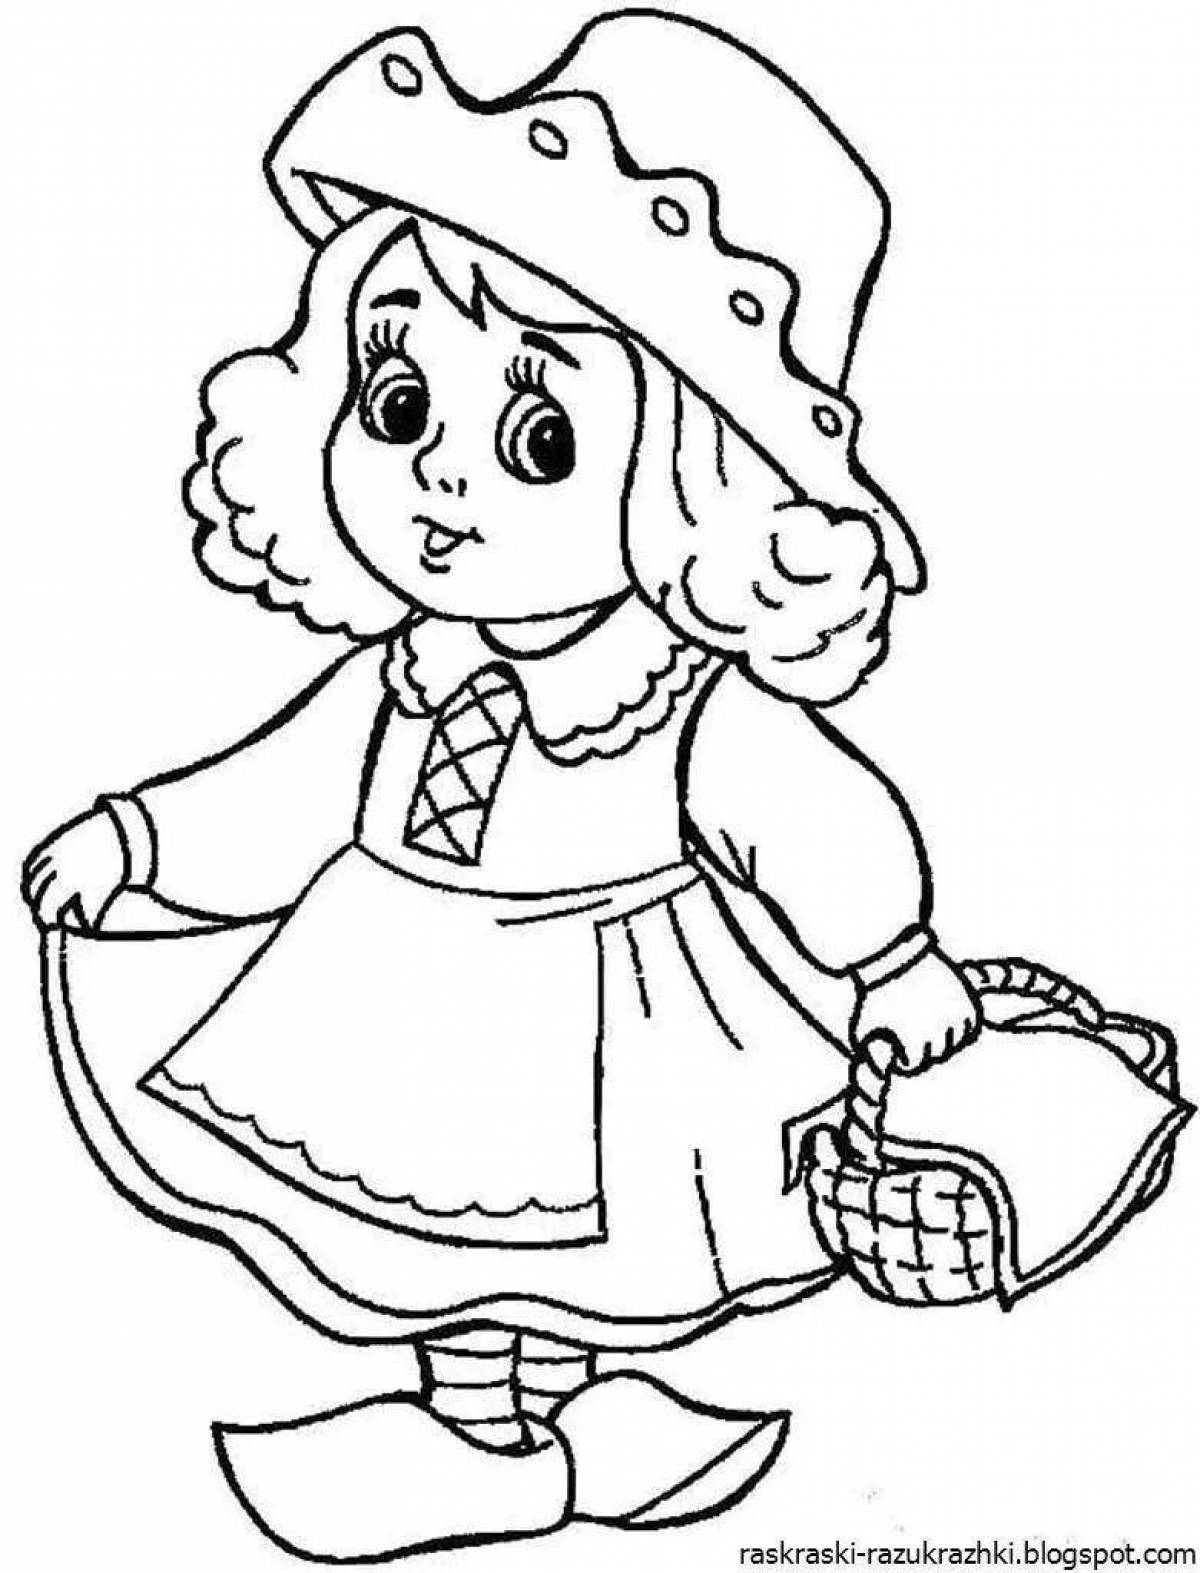 Blessed Little Red Riding Hood coloring page